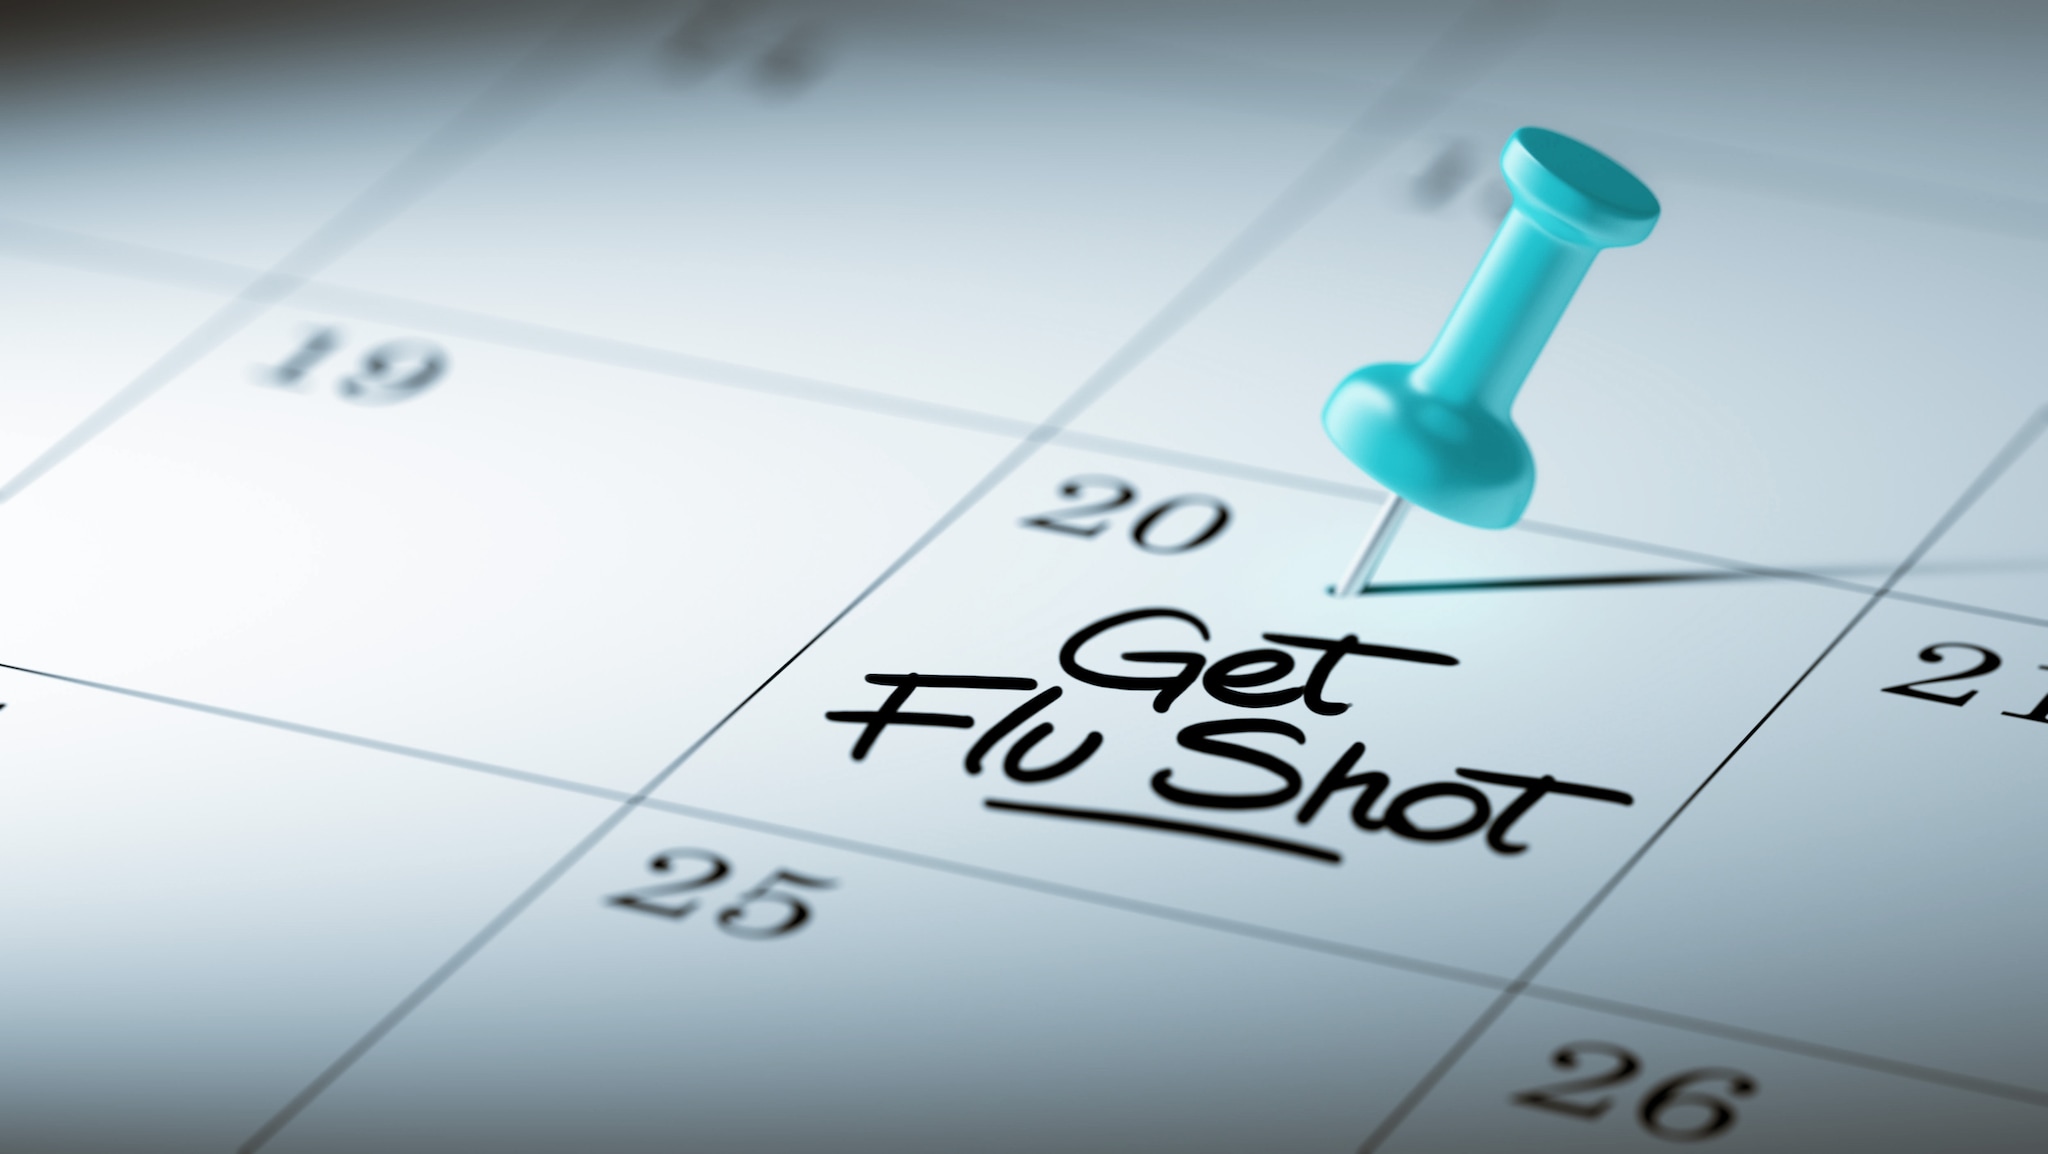 Calendar showing appointment for a flu shot